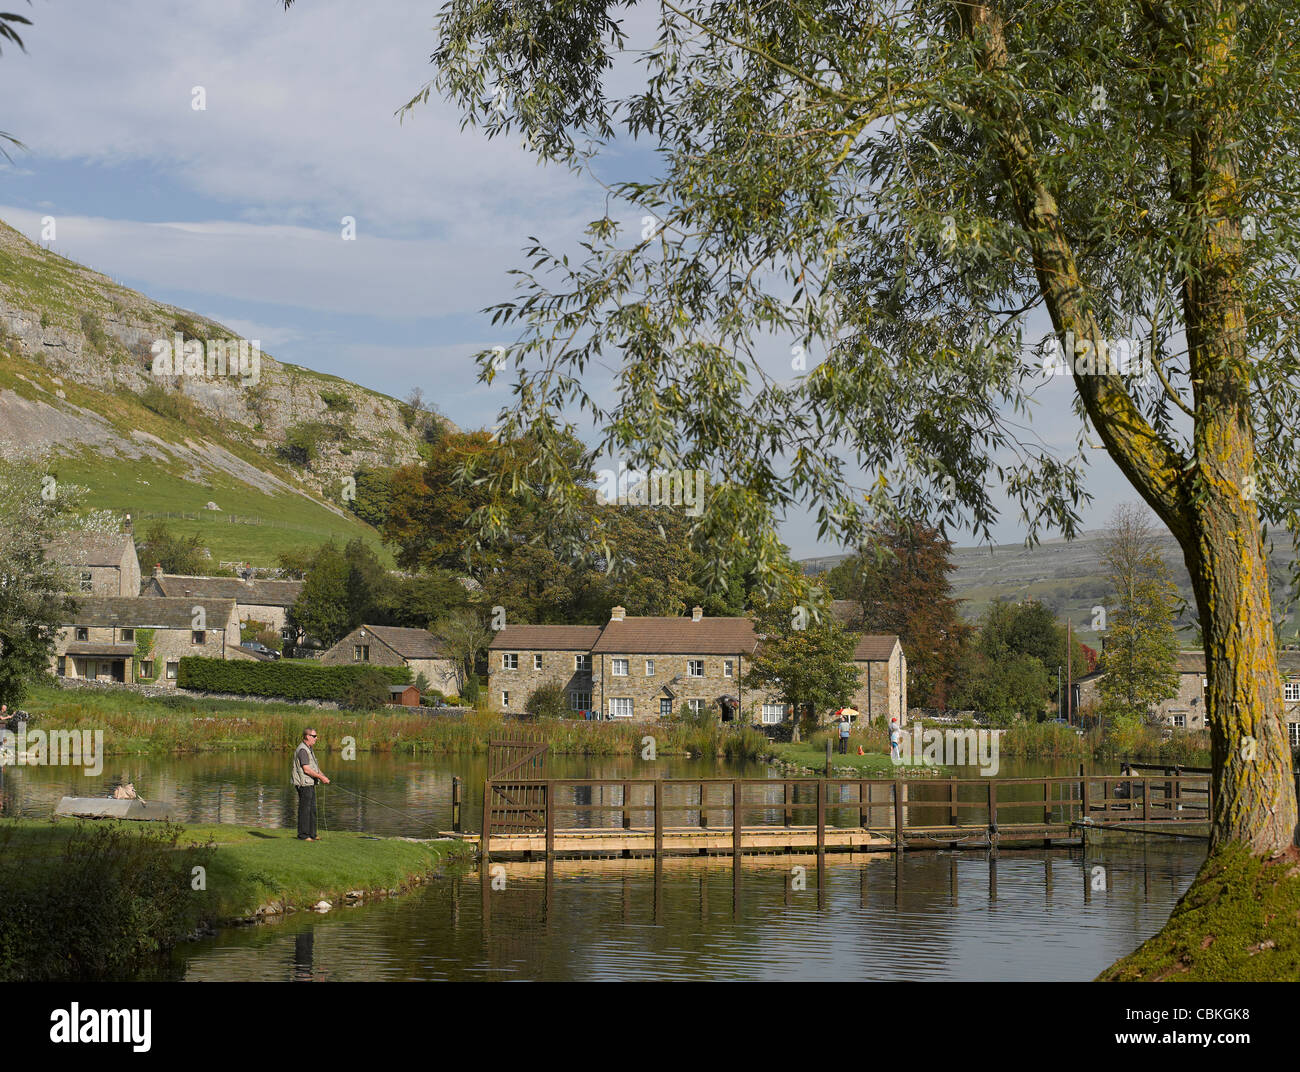 Man Fly Fishing Lake at Kilnsey Park and Trout Farm Wharfedale North Yorkshire Dales National Park England Vereinigtes Königreich GB Großbritannien Stockfoto